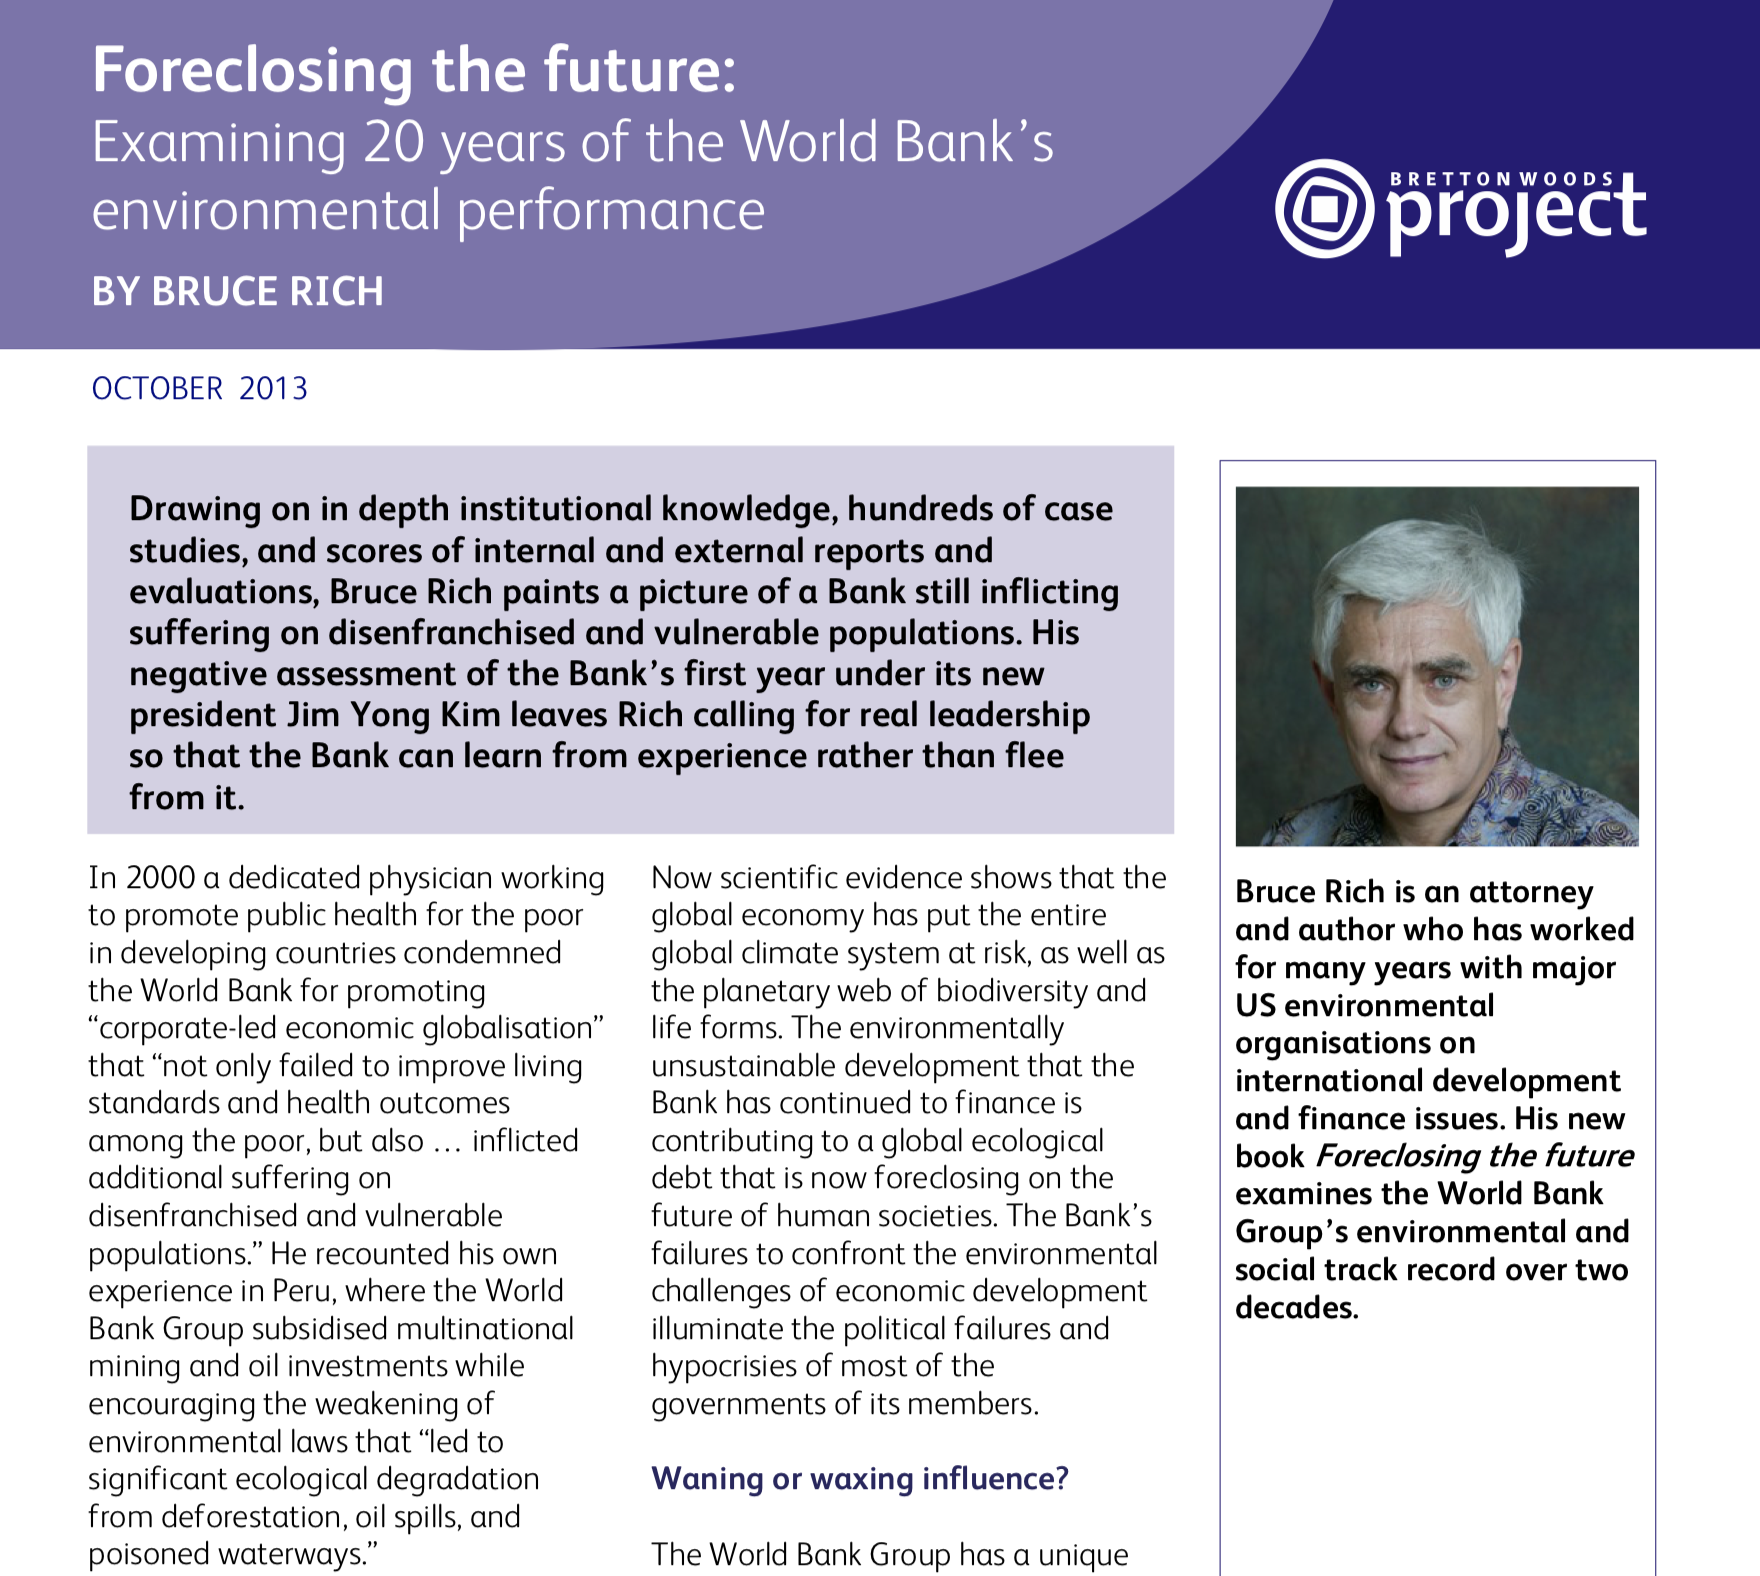 Foreclosing the Future: Examining 20 years of the World Bank's Environmental Performance